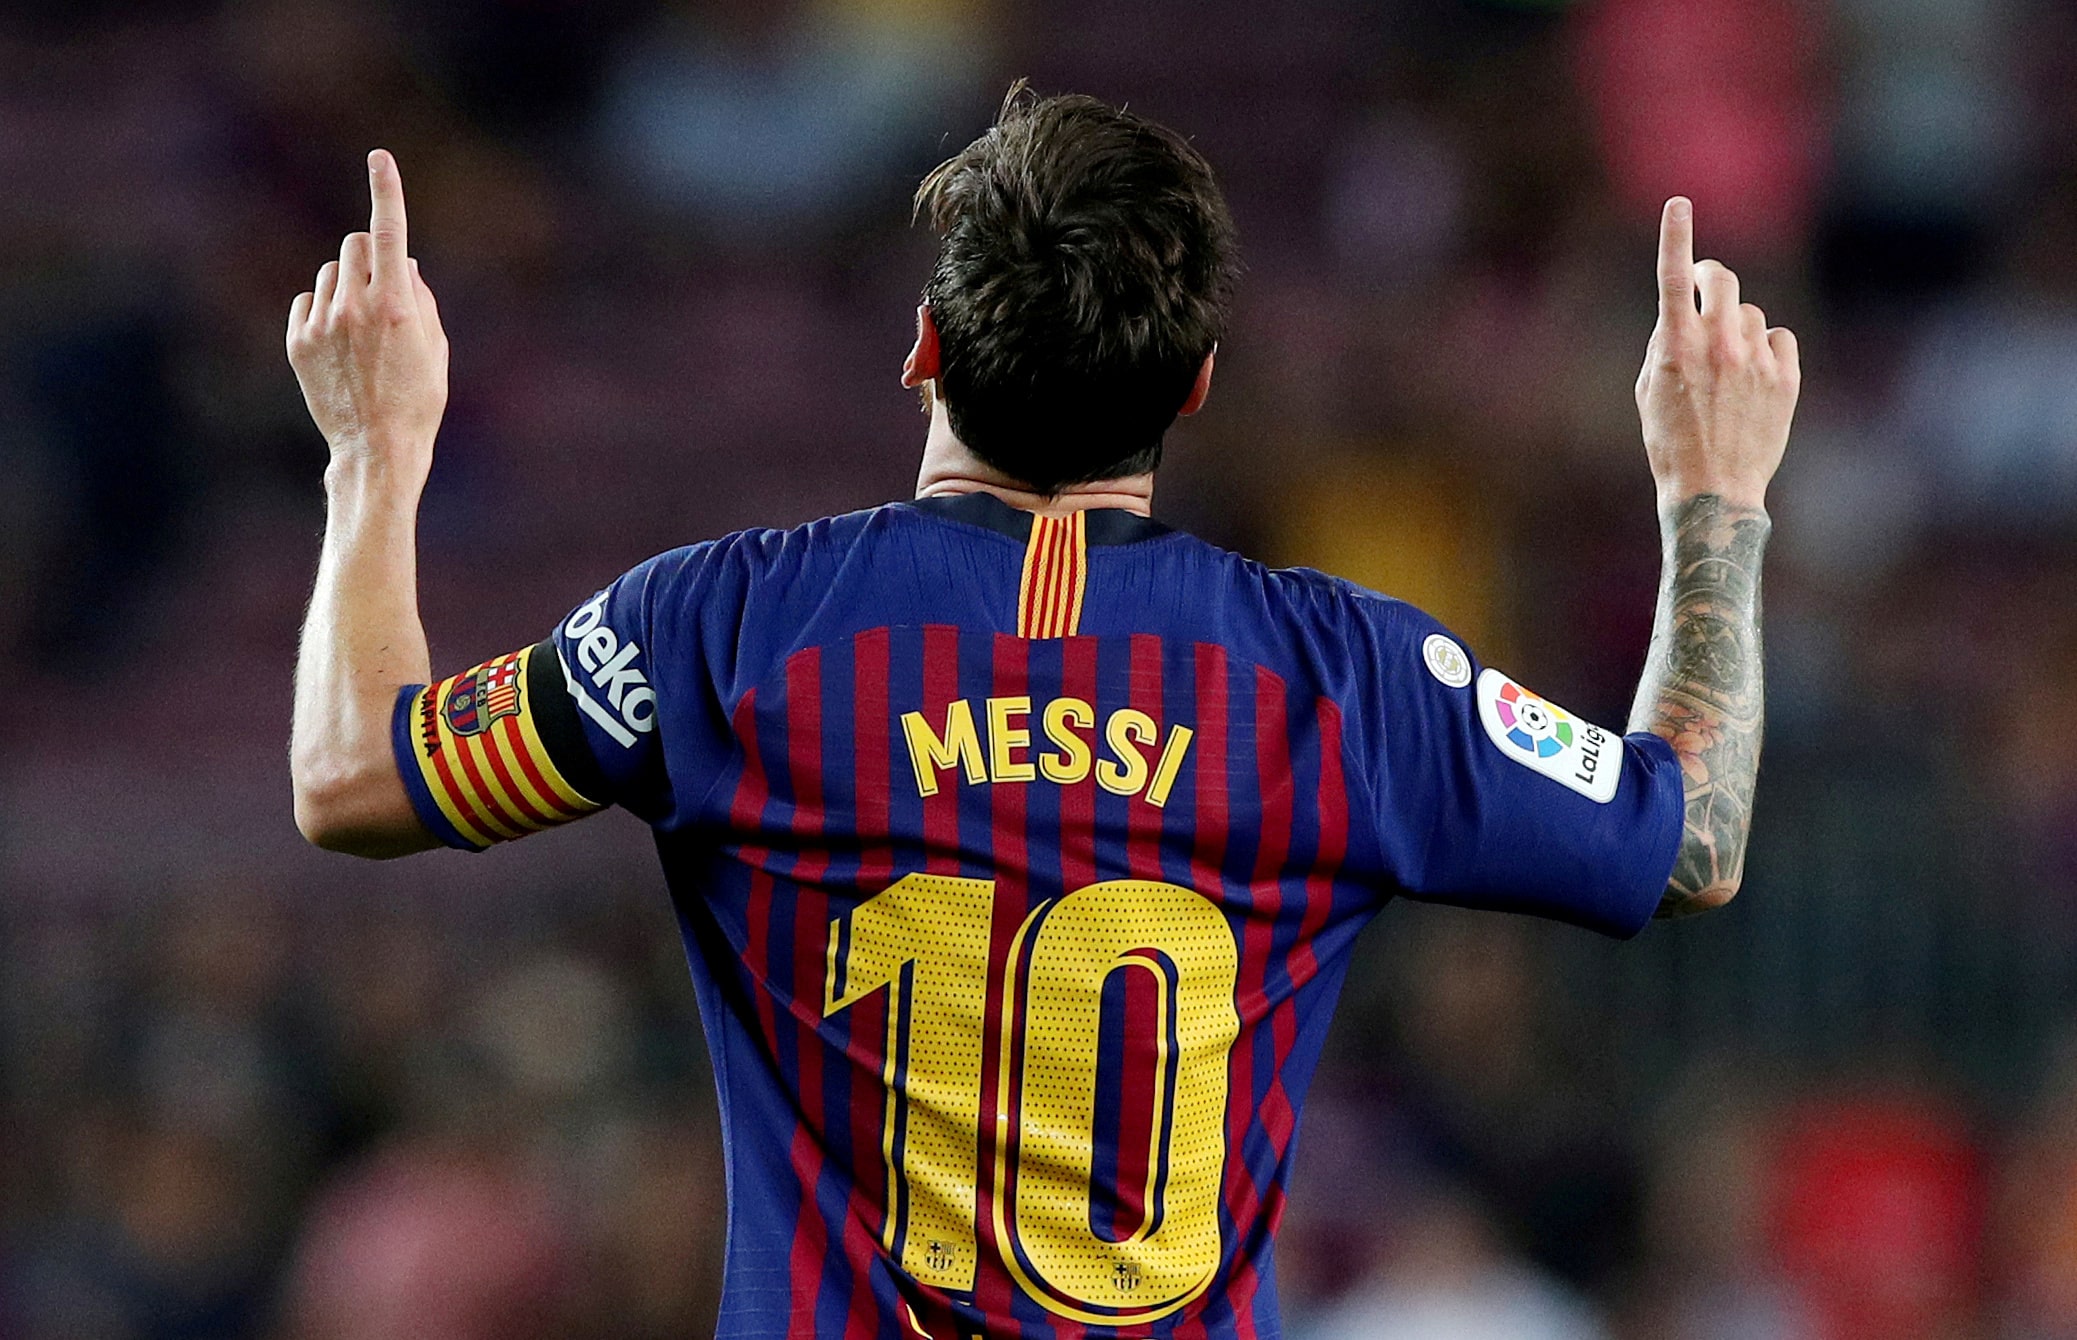 Lionel Messi raises in hands in the air in celebration after scoring a goal (by REUTERS/Albert Gea)